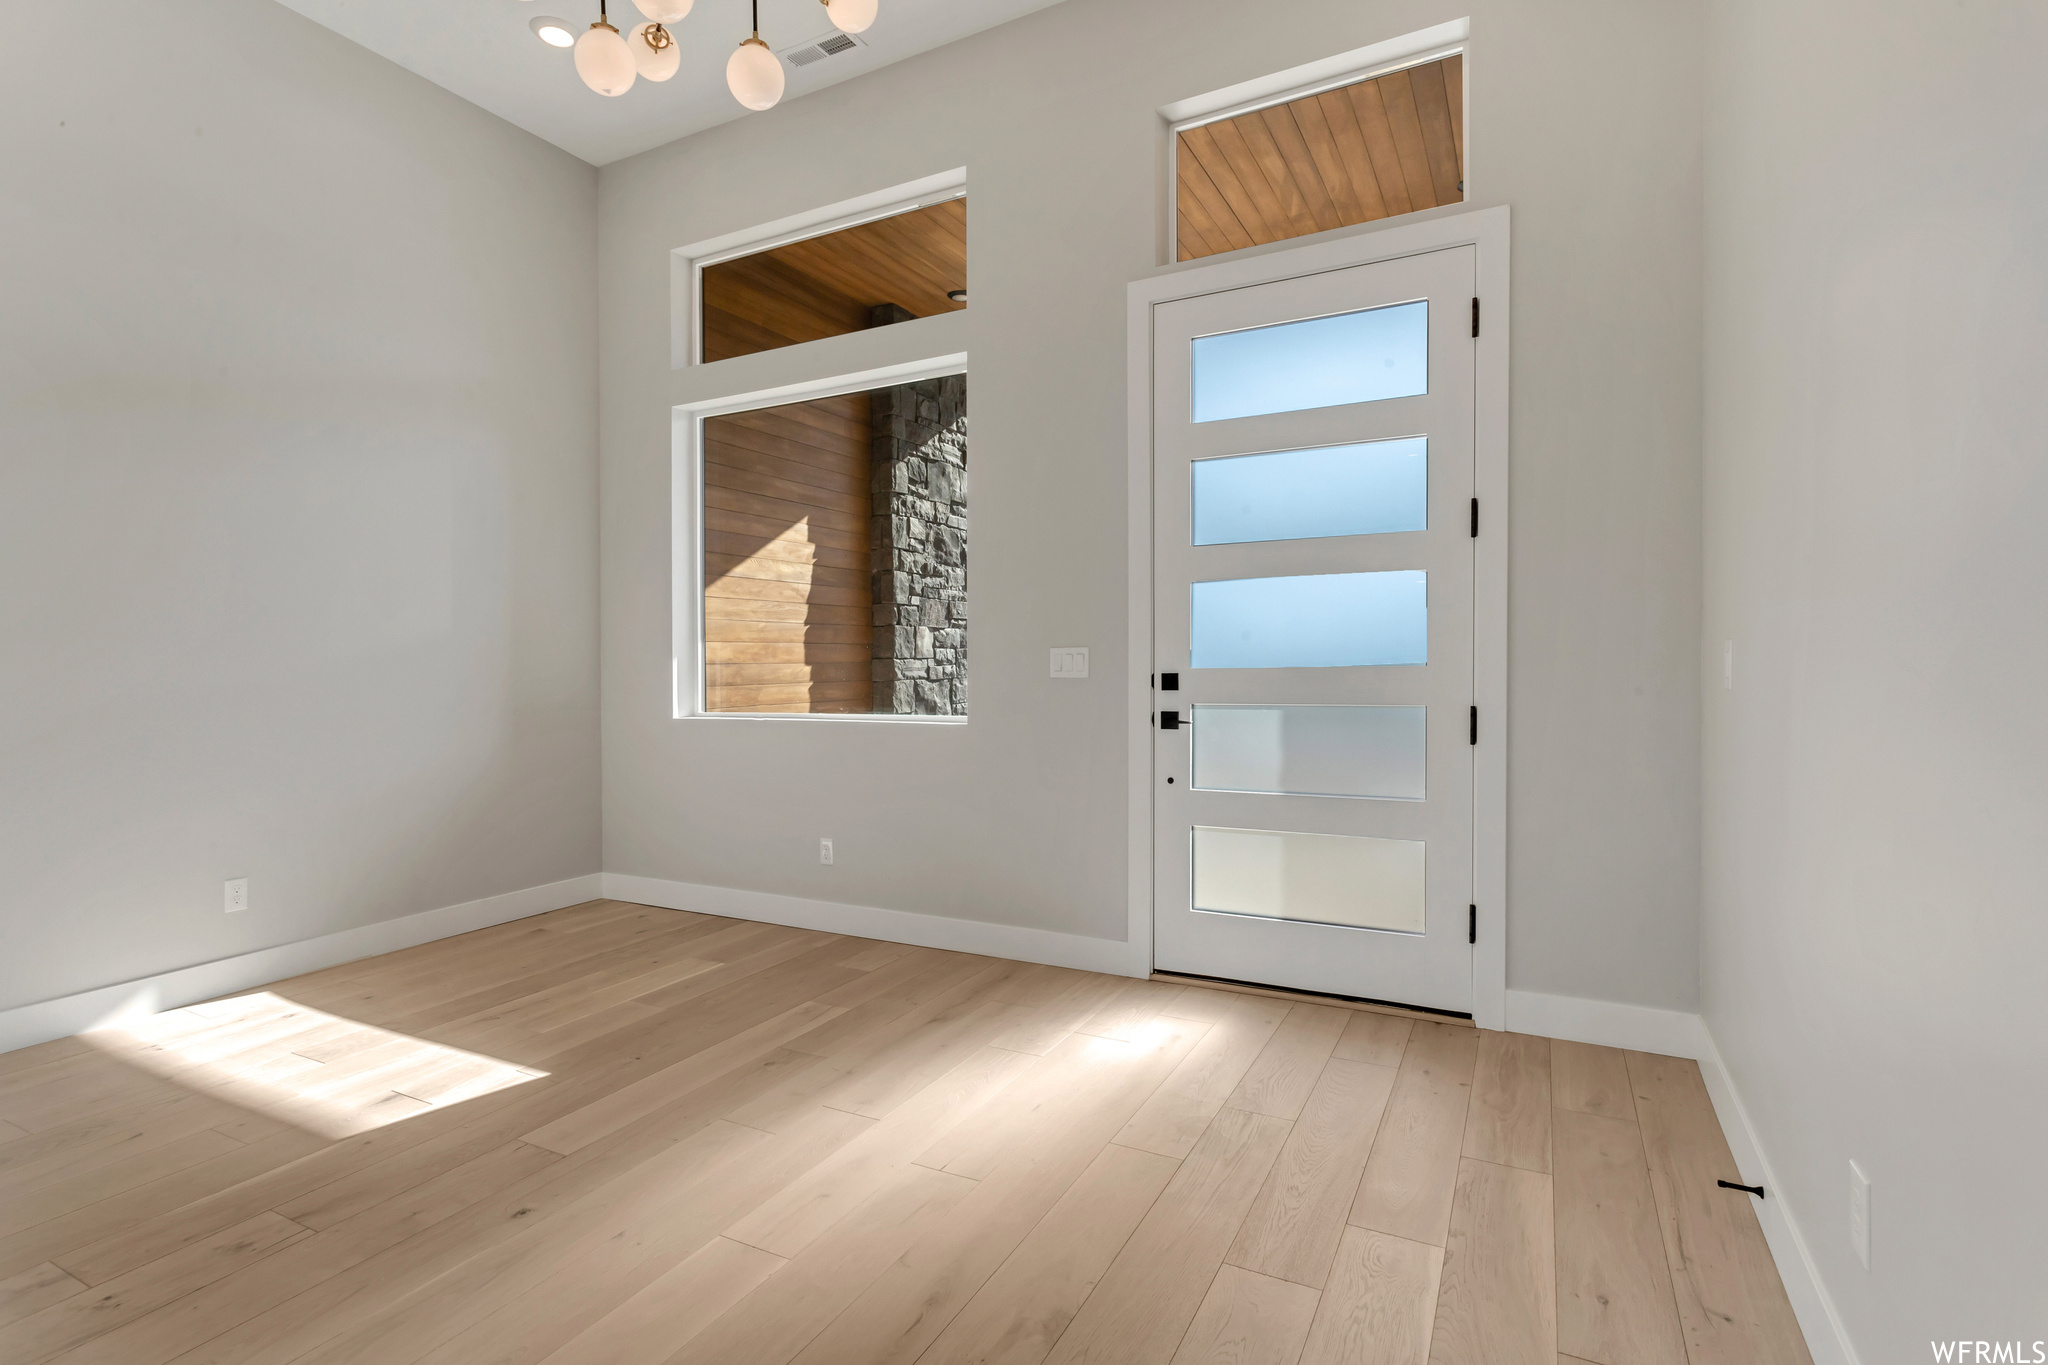 Front Room, all homes have a five panel glass front door, this room features a 12 foot ceiling